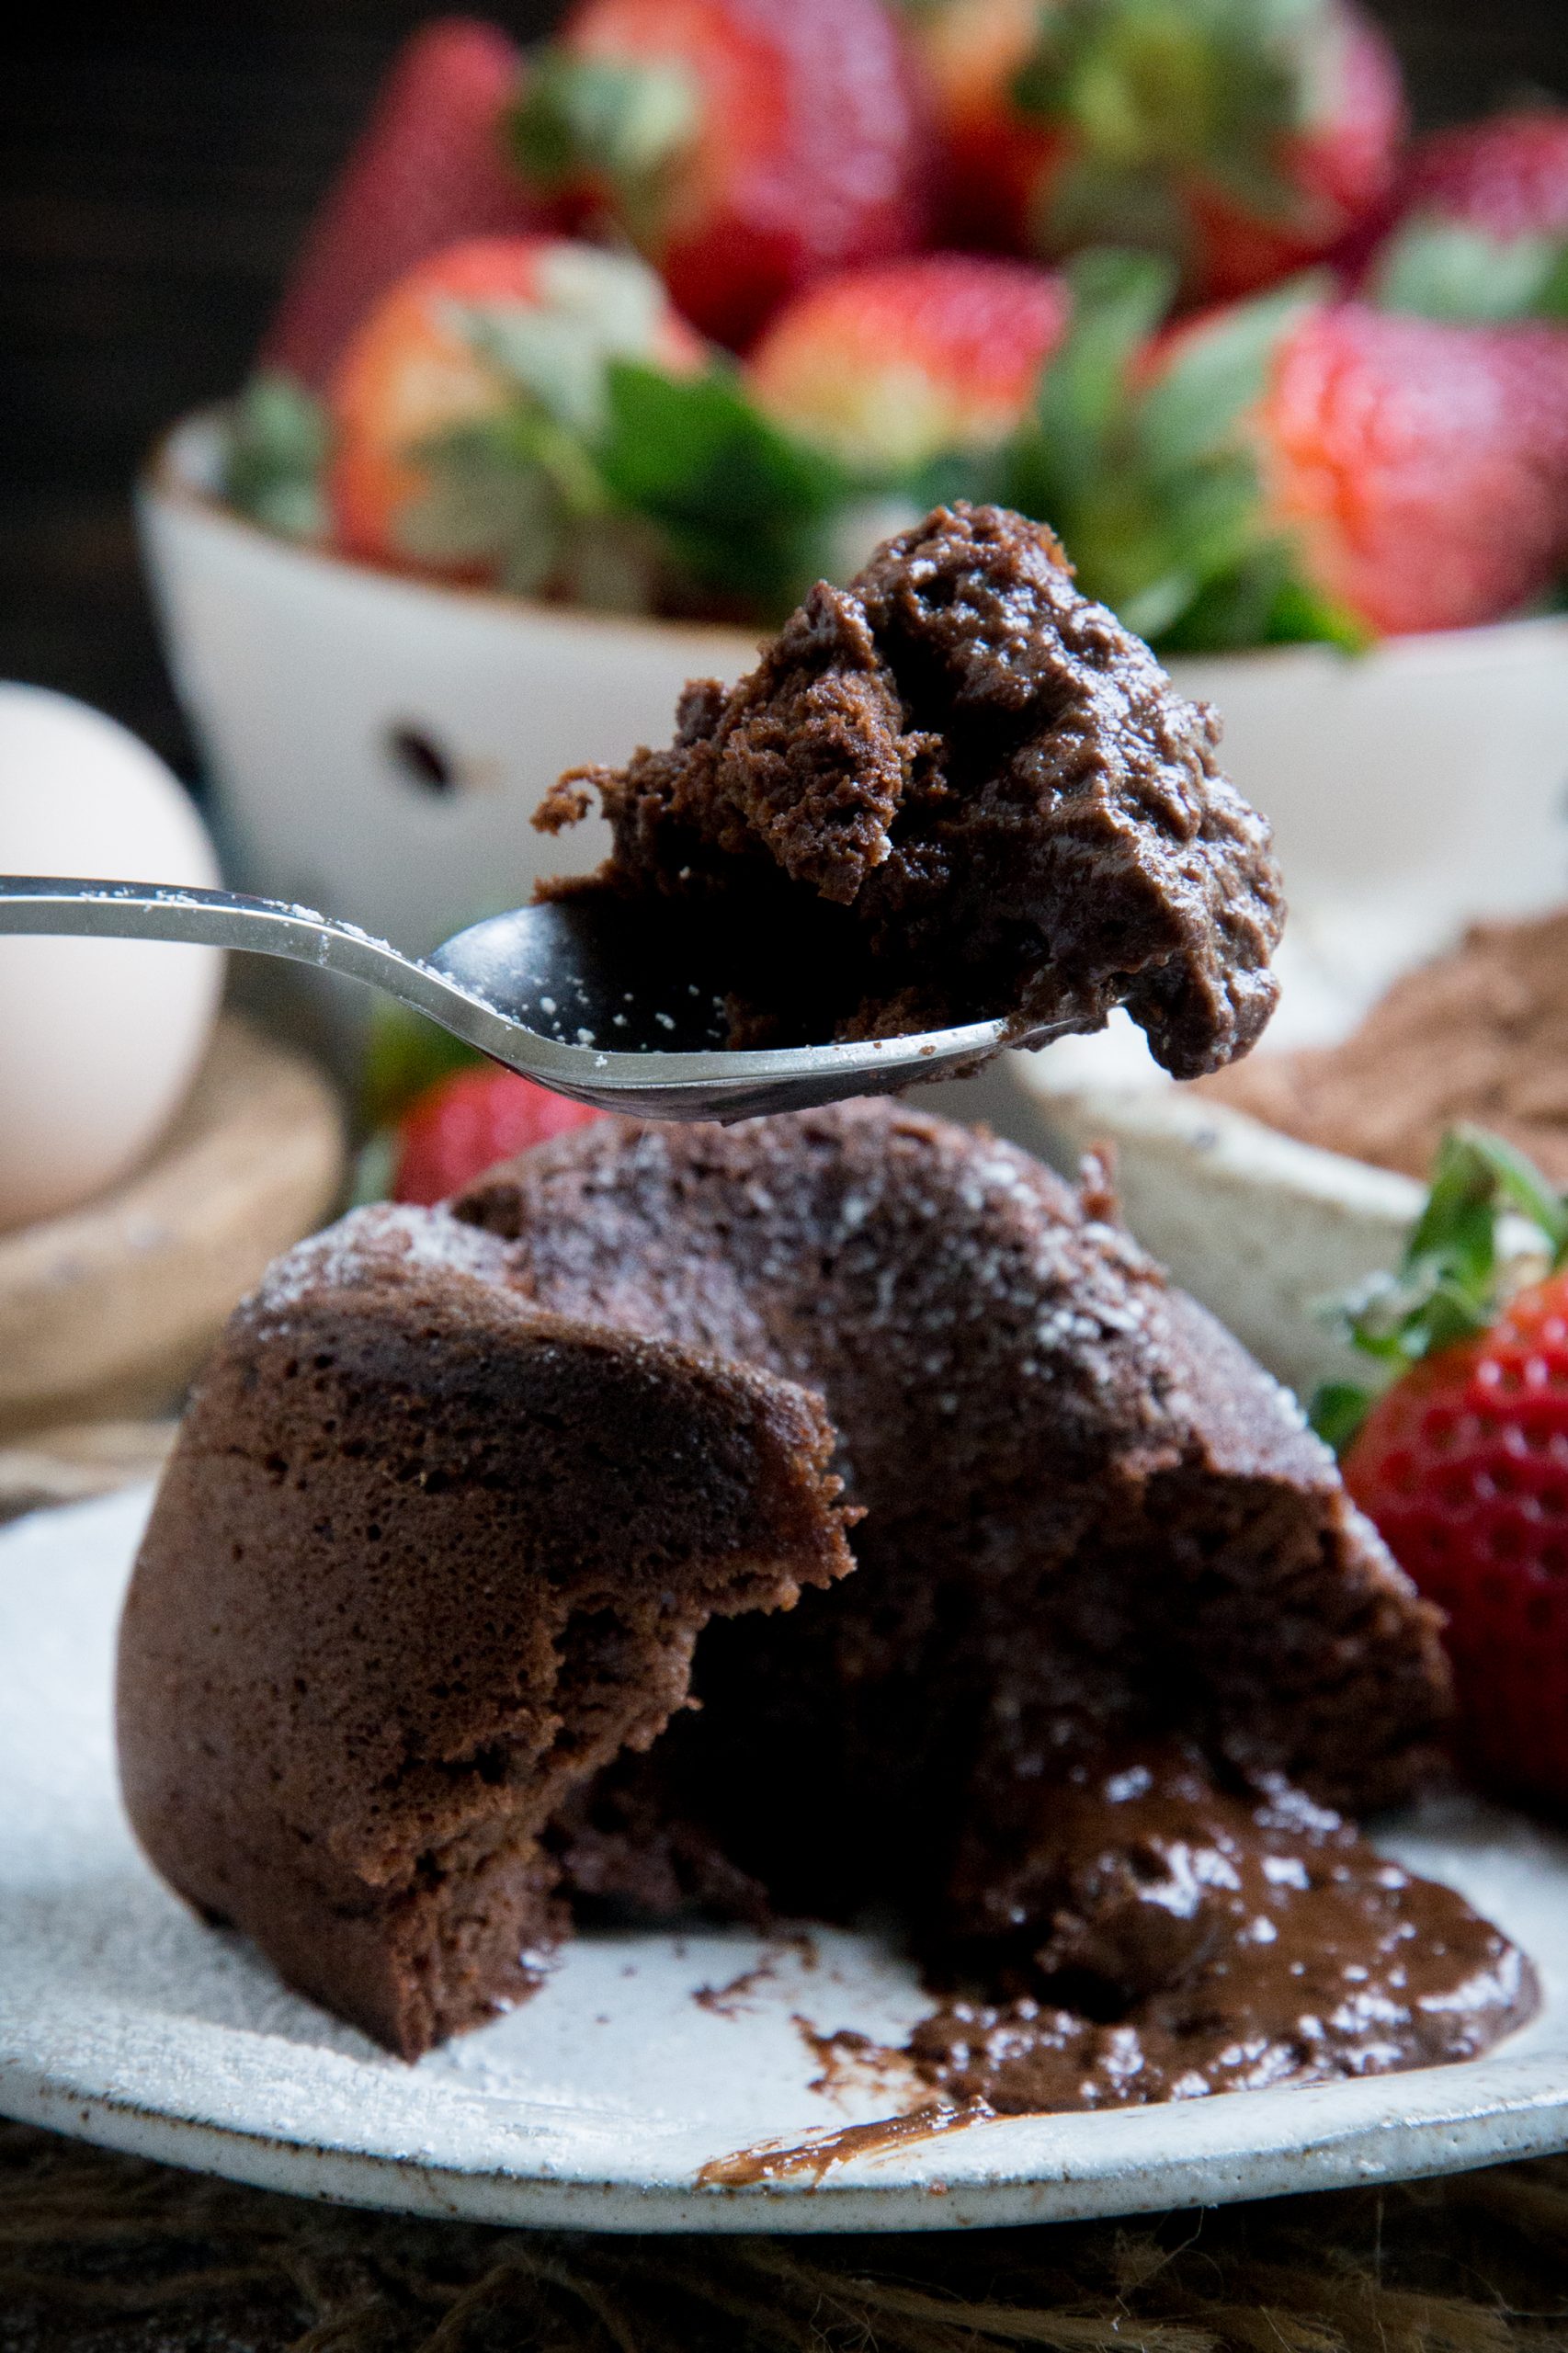 A spoonful of chocolate lava cake.